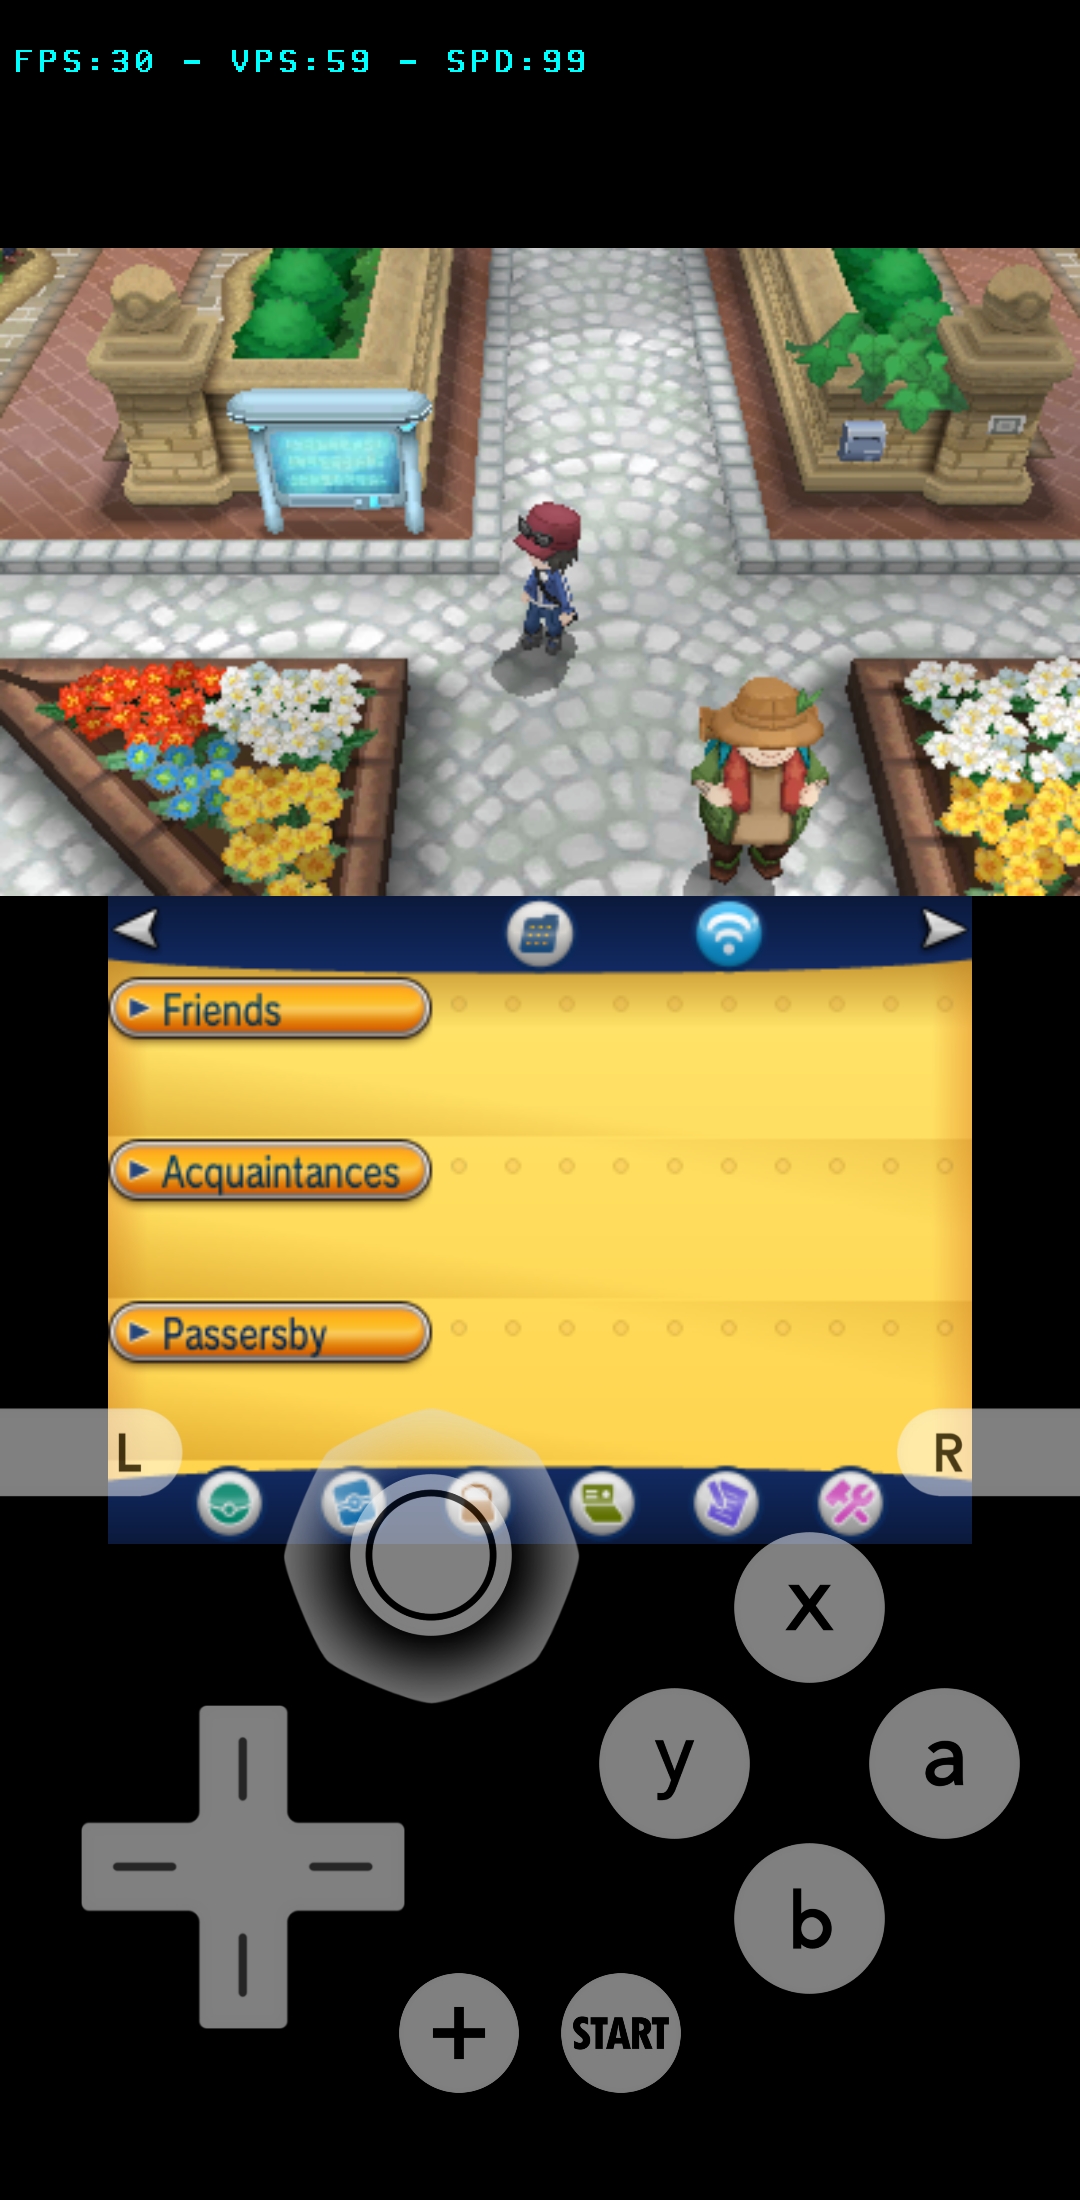 citra emulator for android apk download